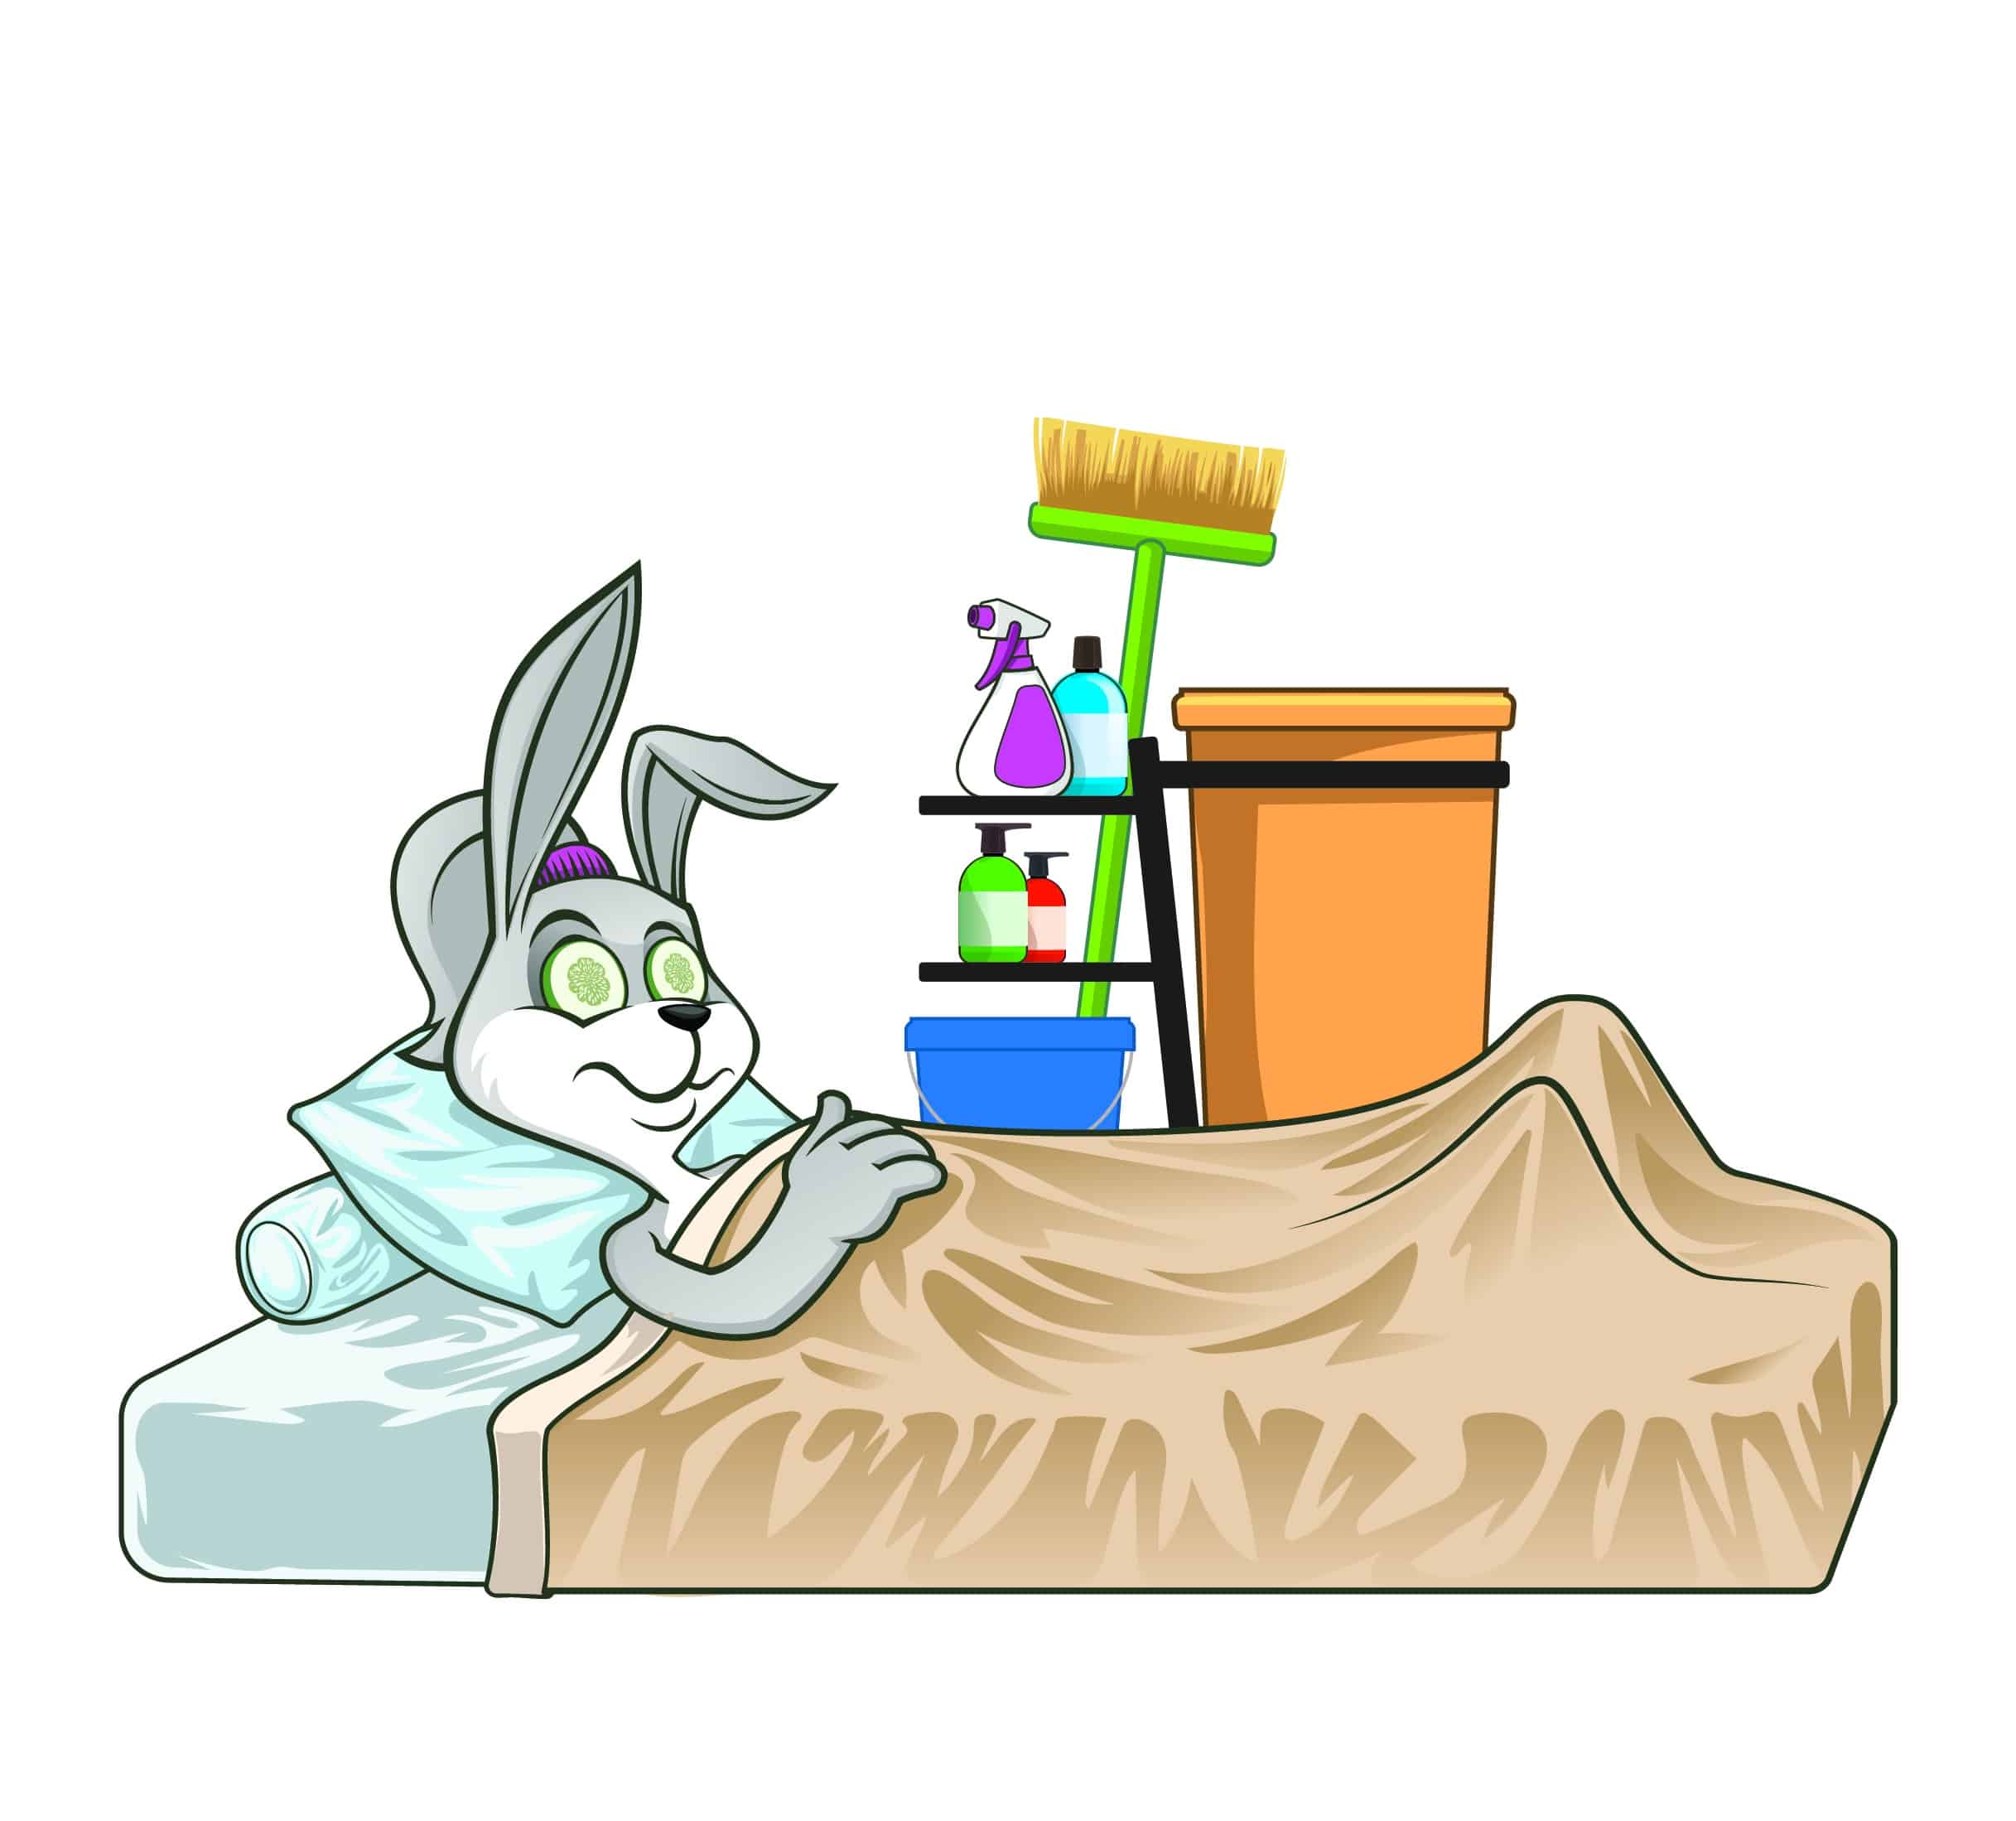 A cartoon bunny laying in bed with a broom and cleaning supplies.